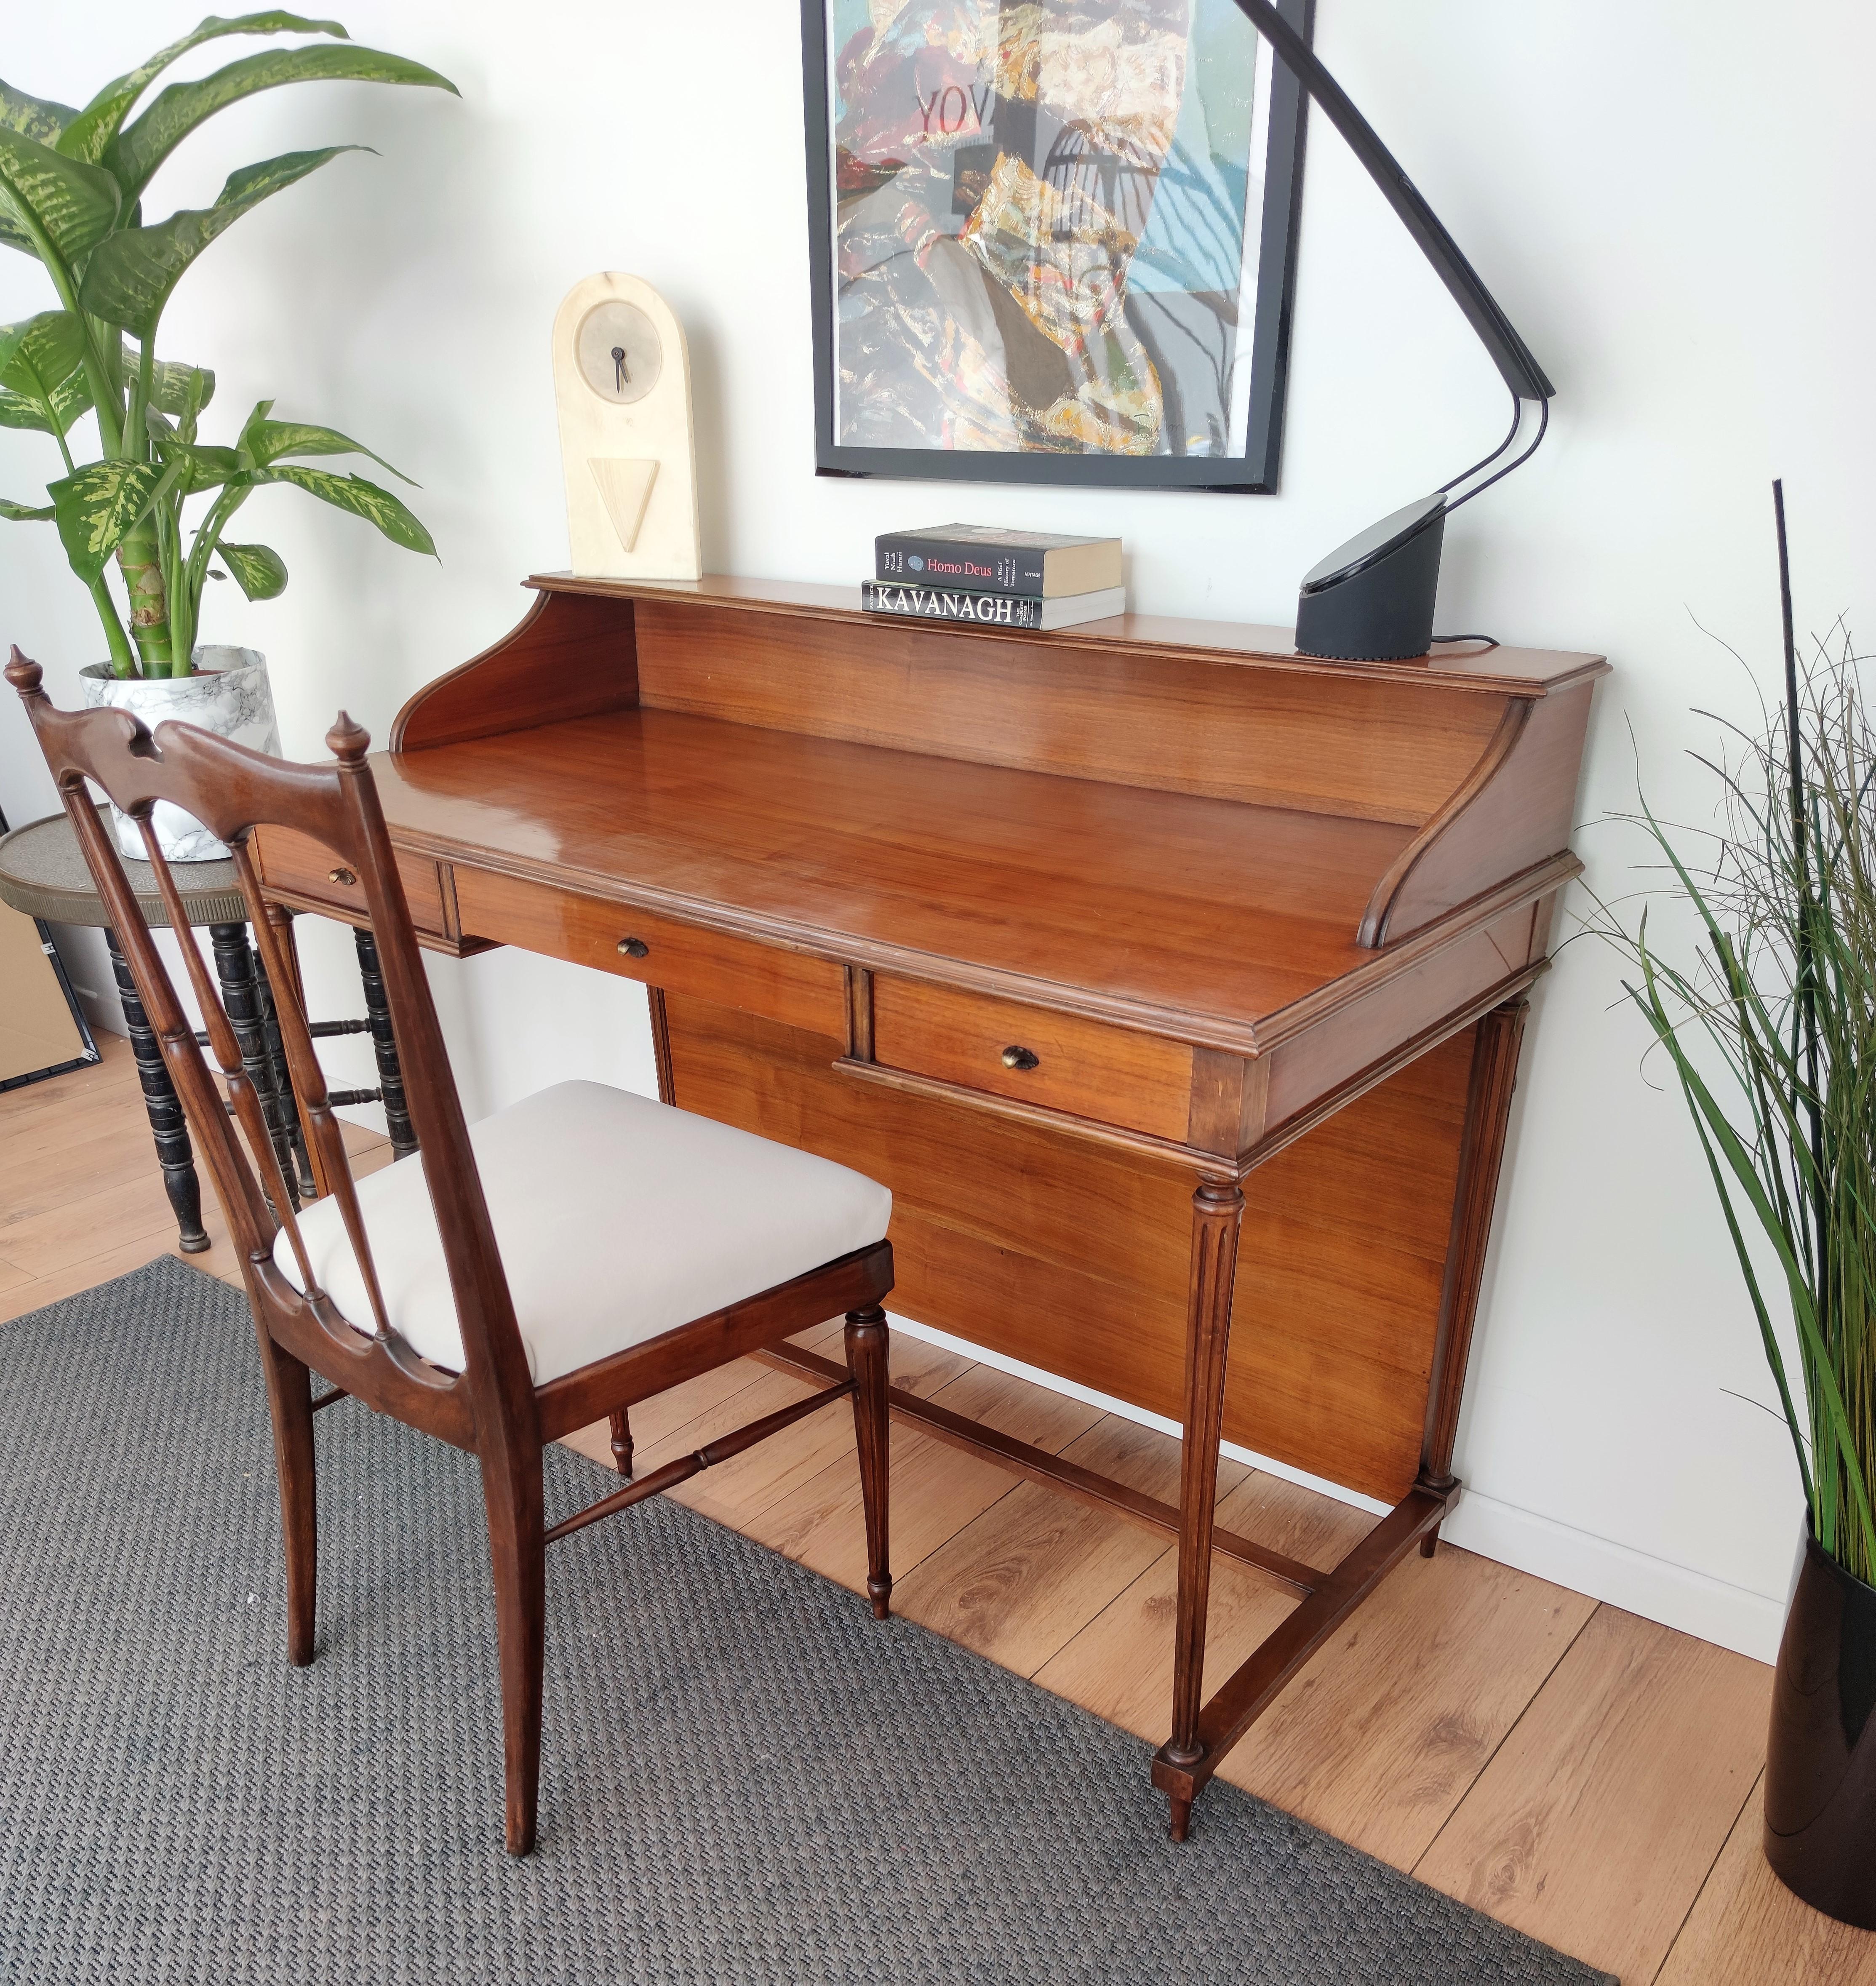 Brass 1950s Italian Mid-Century Modern Regency Desk Writing Table and Chair For Sale